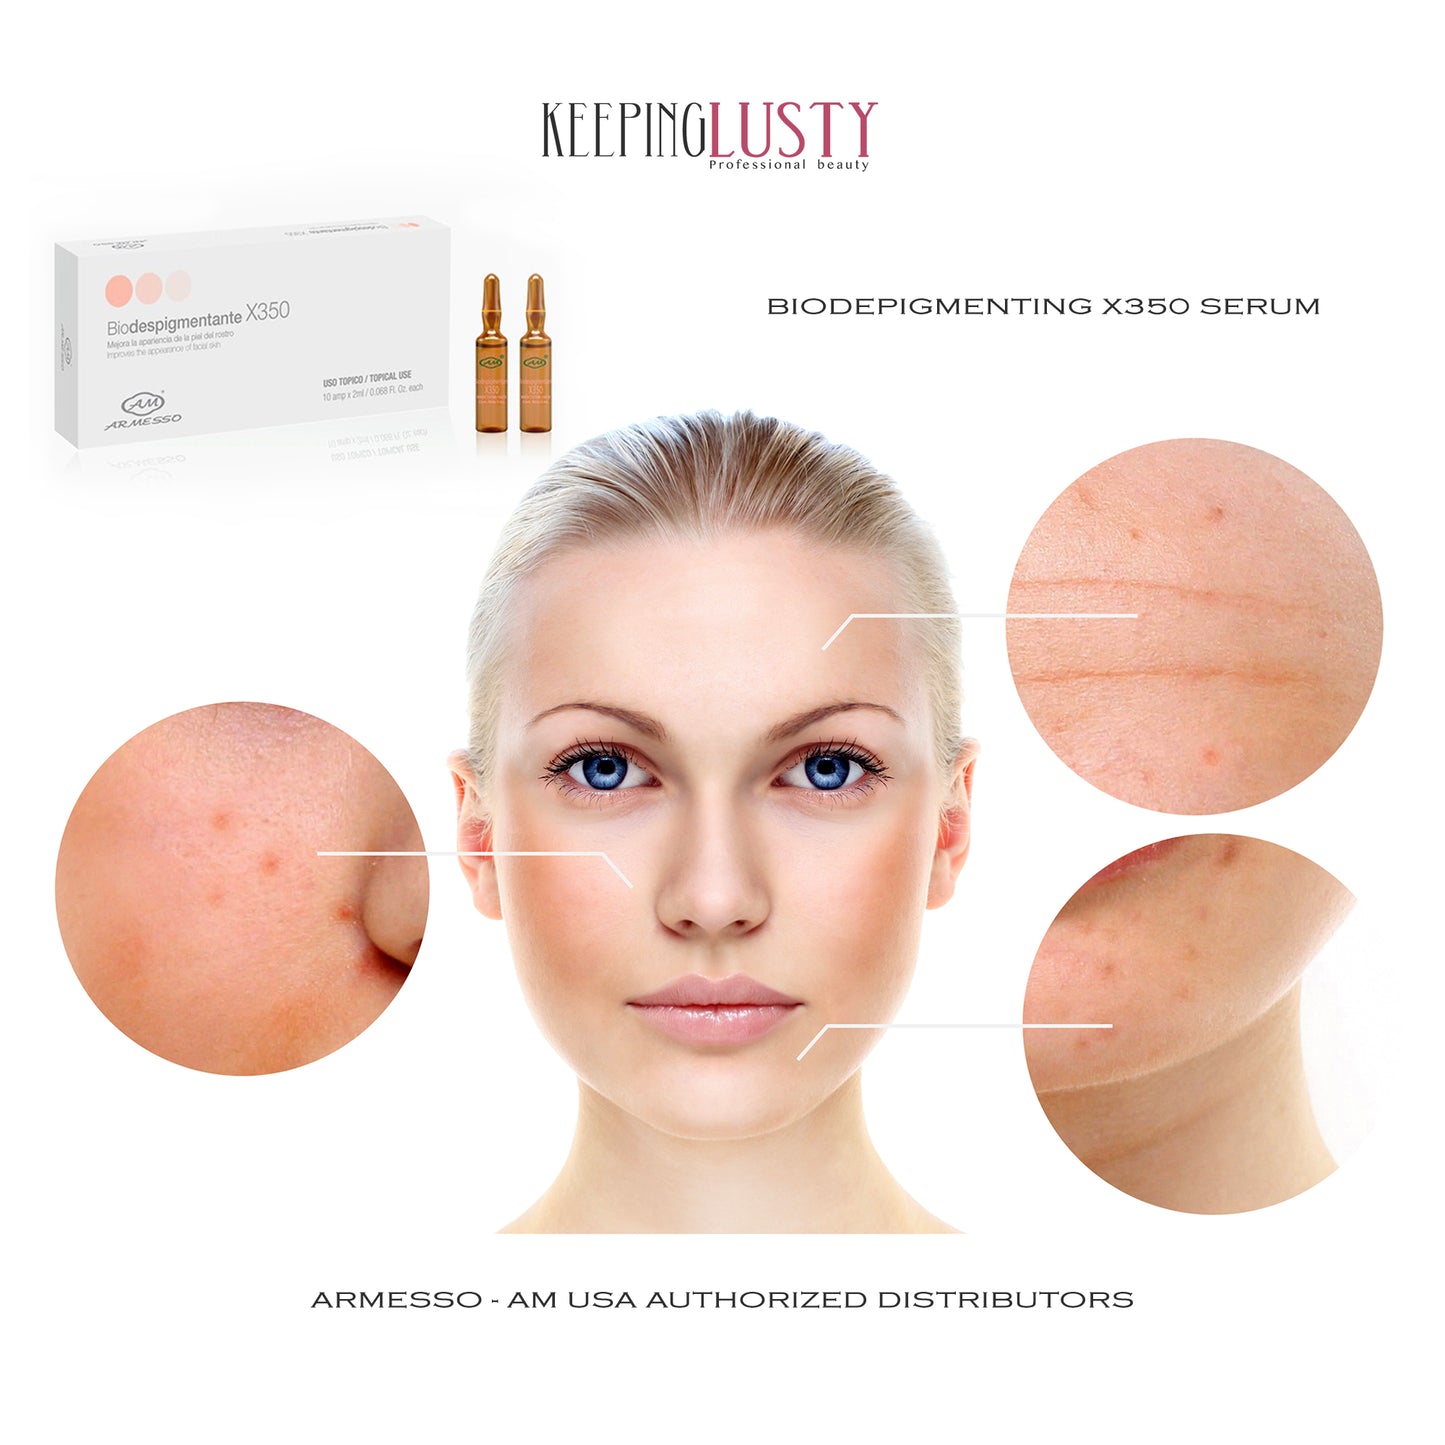 Load image into Gallery viewer, Armesso-AM Biodepigmenting X350 | Mesotherapy Serum | - Keeping Lusty
